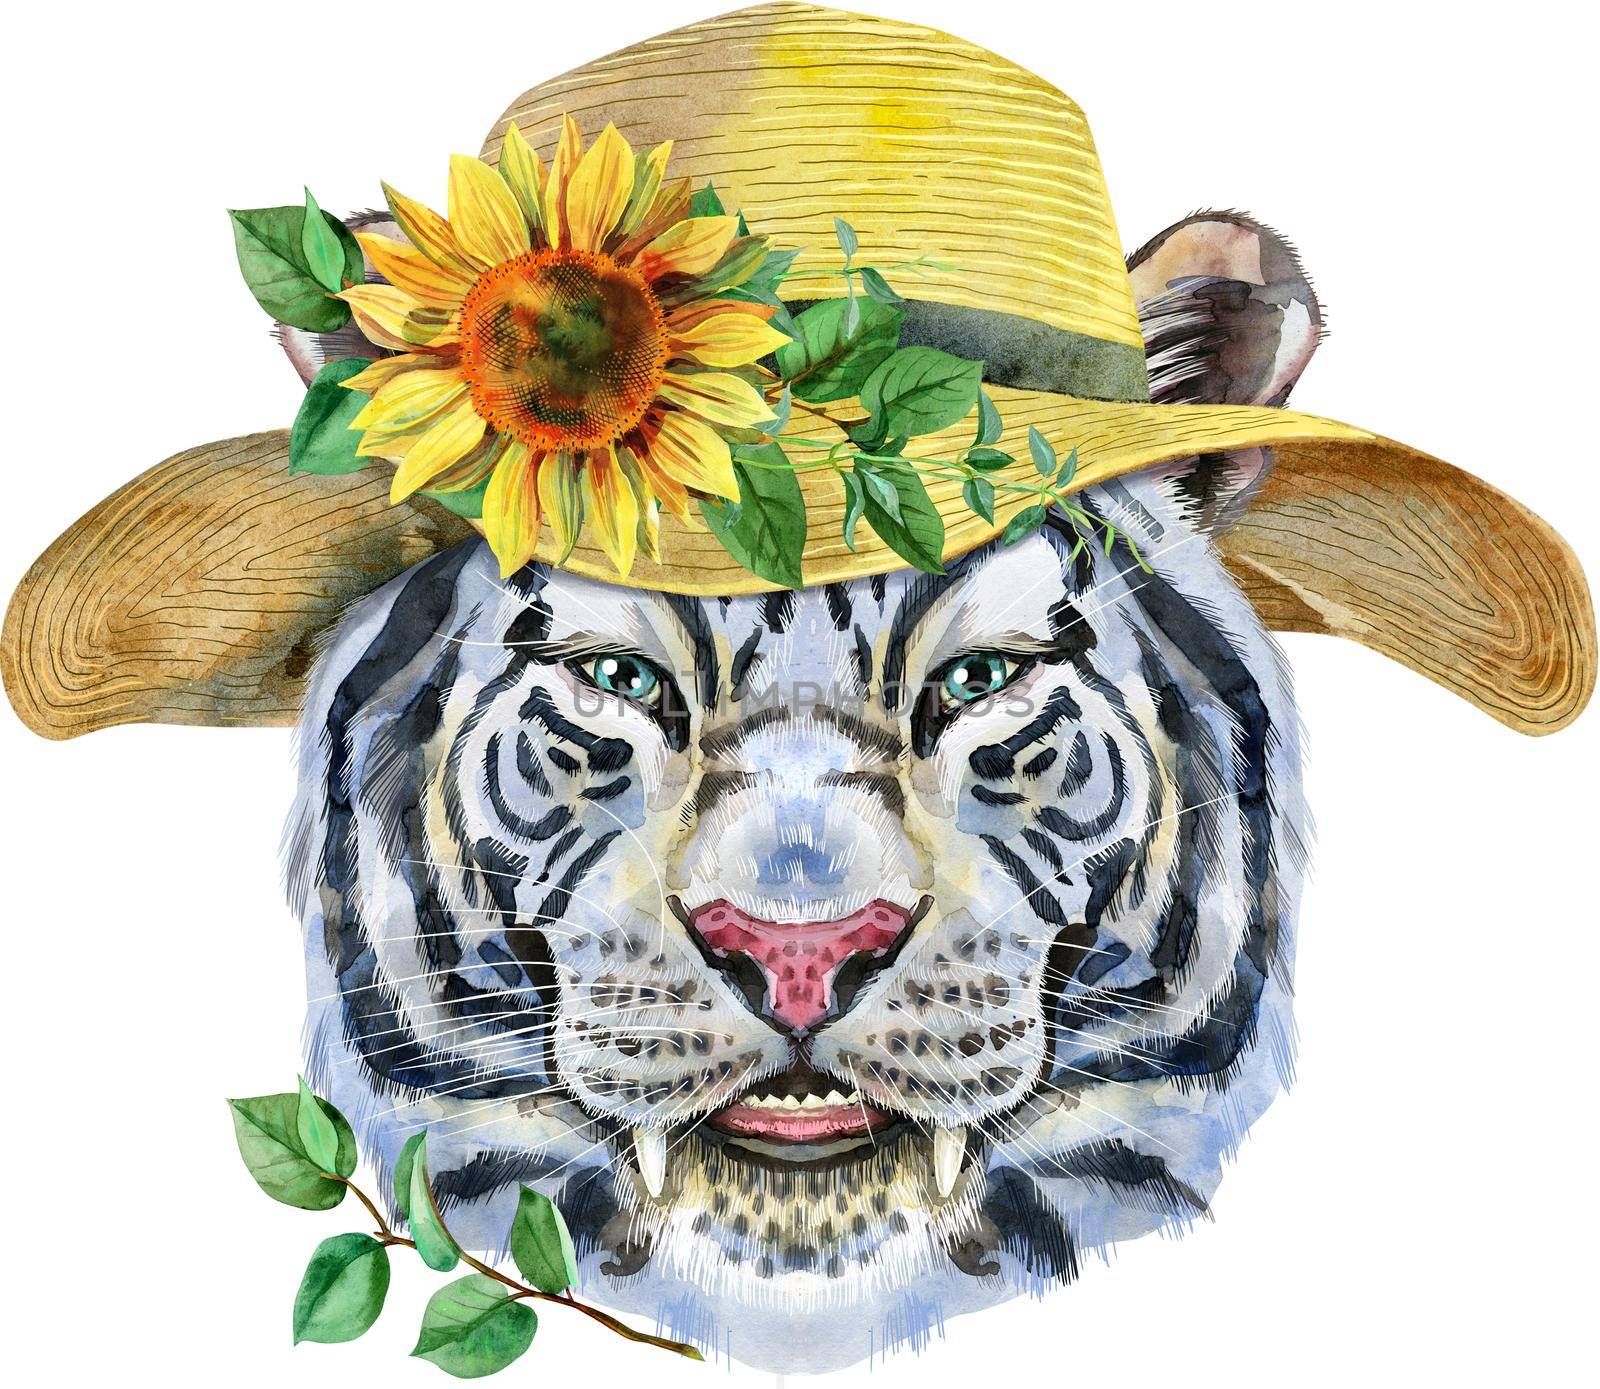 Watercolor illustration of white smiling tiger in summer hat with sunflower